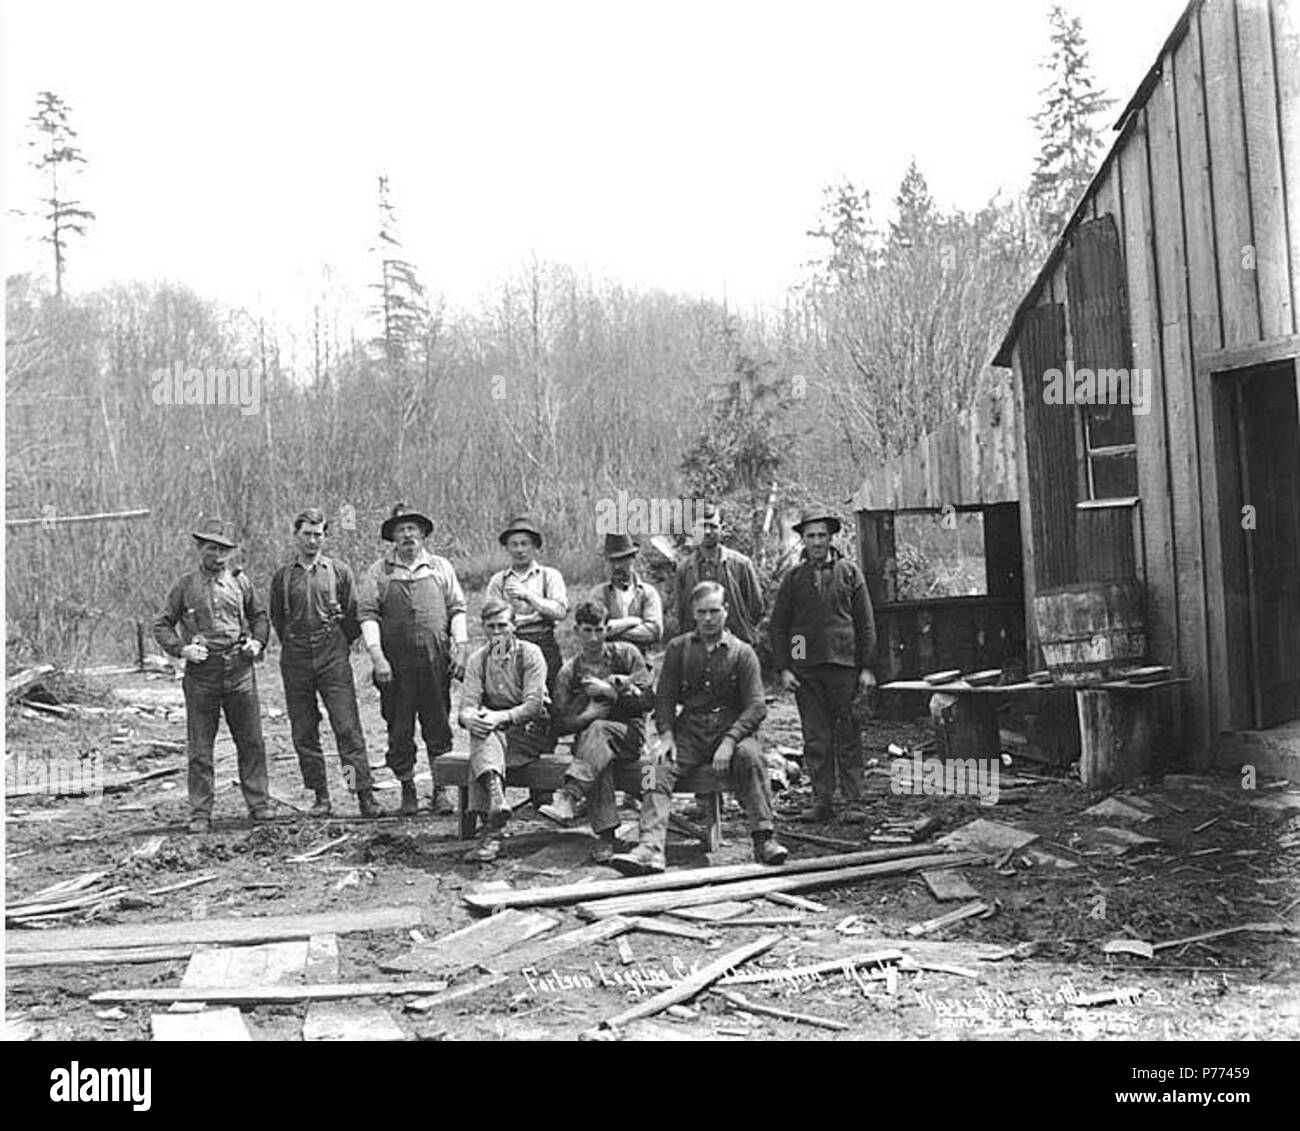 . English: Logging crew at camp, Fortson Logging Company, ca. 1917 . English: Caption on image: Fortson Logging Co., Darrington, Wash. Kinsey Photo, Seattle. No. 2 PH Coll 516.1301 The Fortson Logging Company was in business from ca. 1913 to ca. 1922, headquartered in Darrington. Darrington is a logging and sawmill community on the Sauk River nearly thirty miles east of Arlington in north central Snohomish County. It was a meeting place for Indian tribes in early days. From there five trails lead into the high mountains. Early names for this place were Sauk Portage and The Burn. The former rel Stock Photo